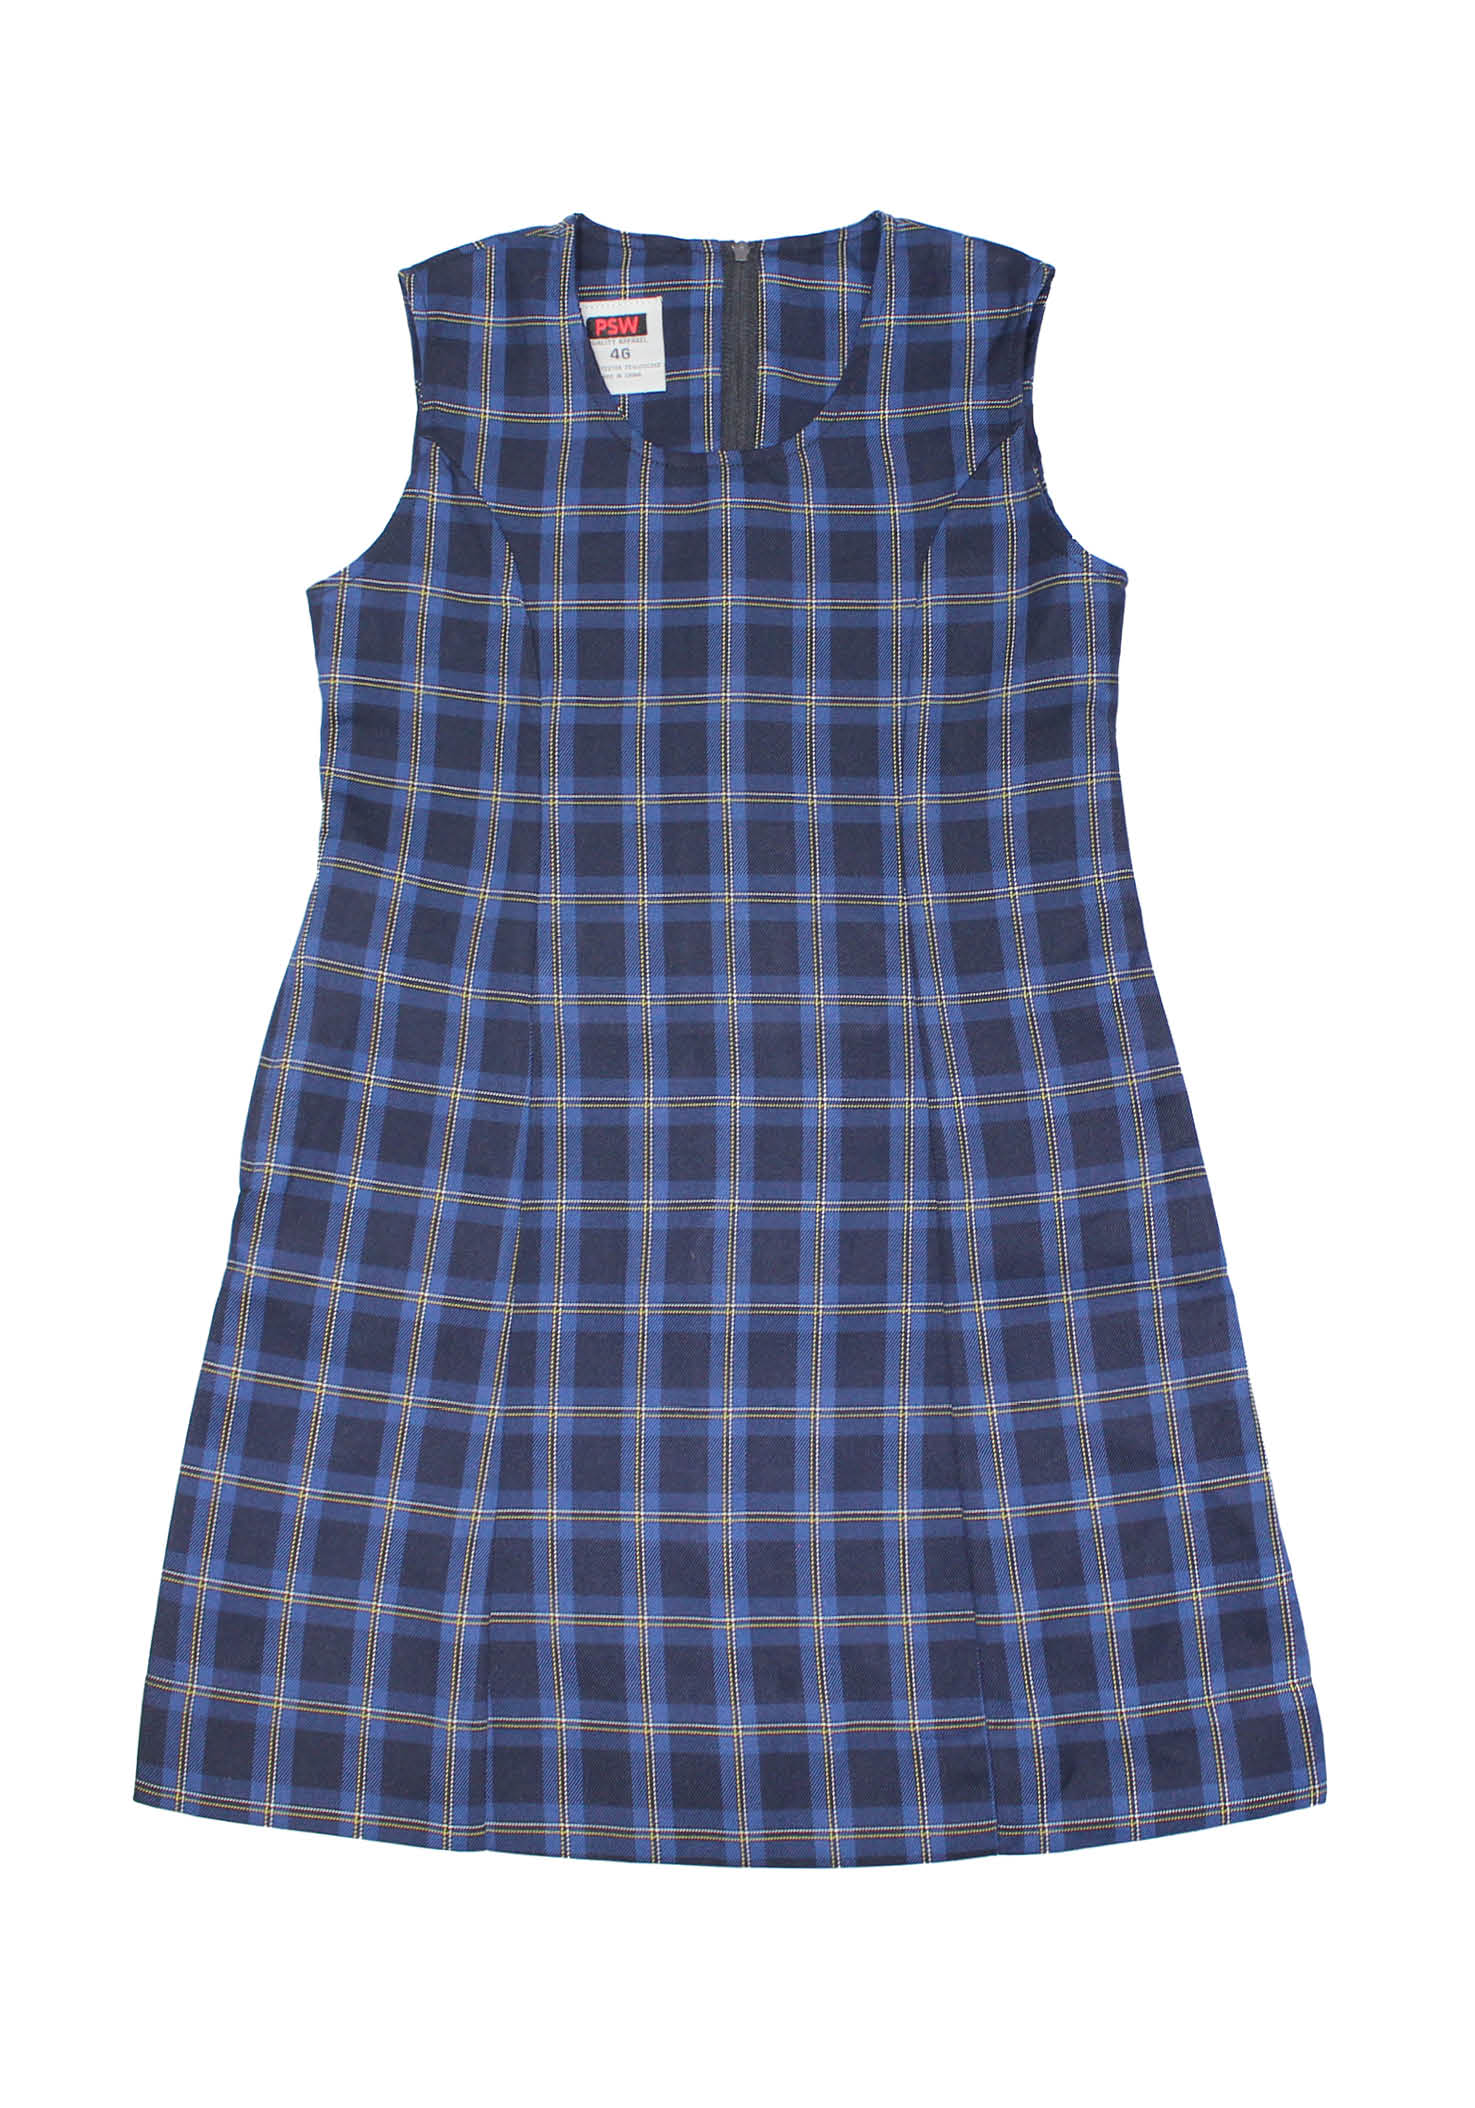 Ferncourt Girls Winter Check Tunic | Shop at Pickles Schoolwear ...